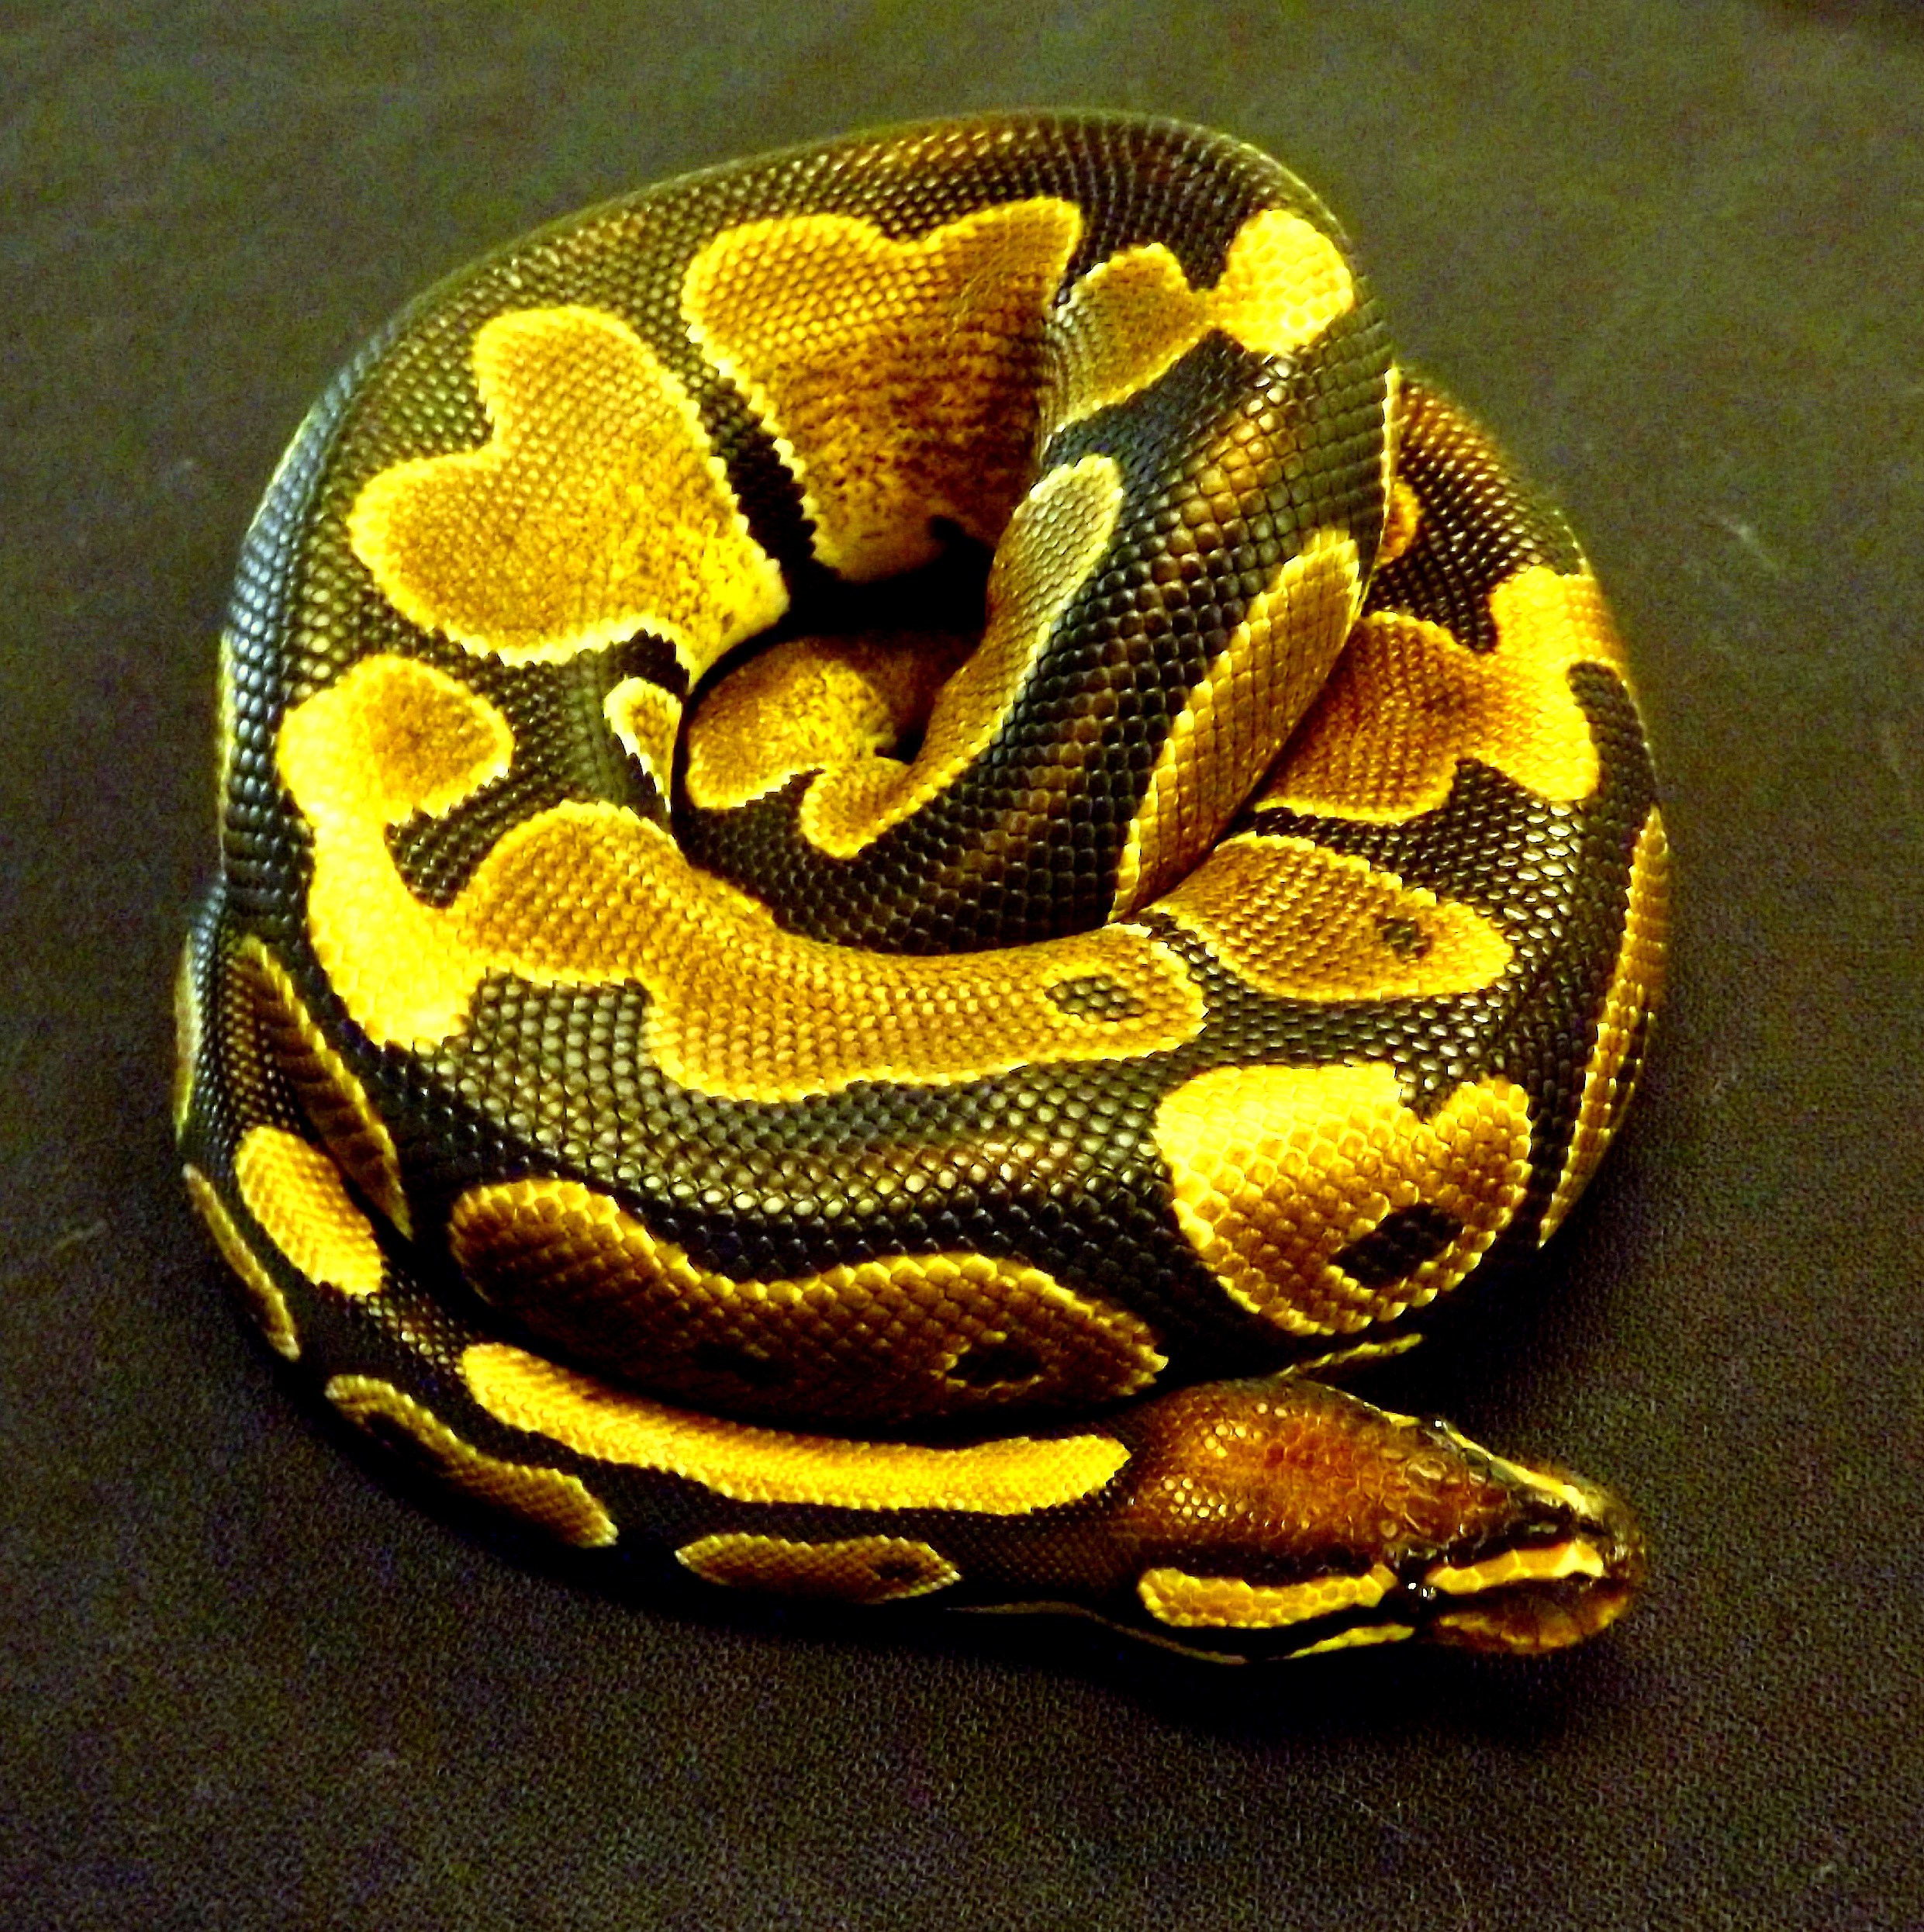 How do I care for my Ball Python? – How can we help you?